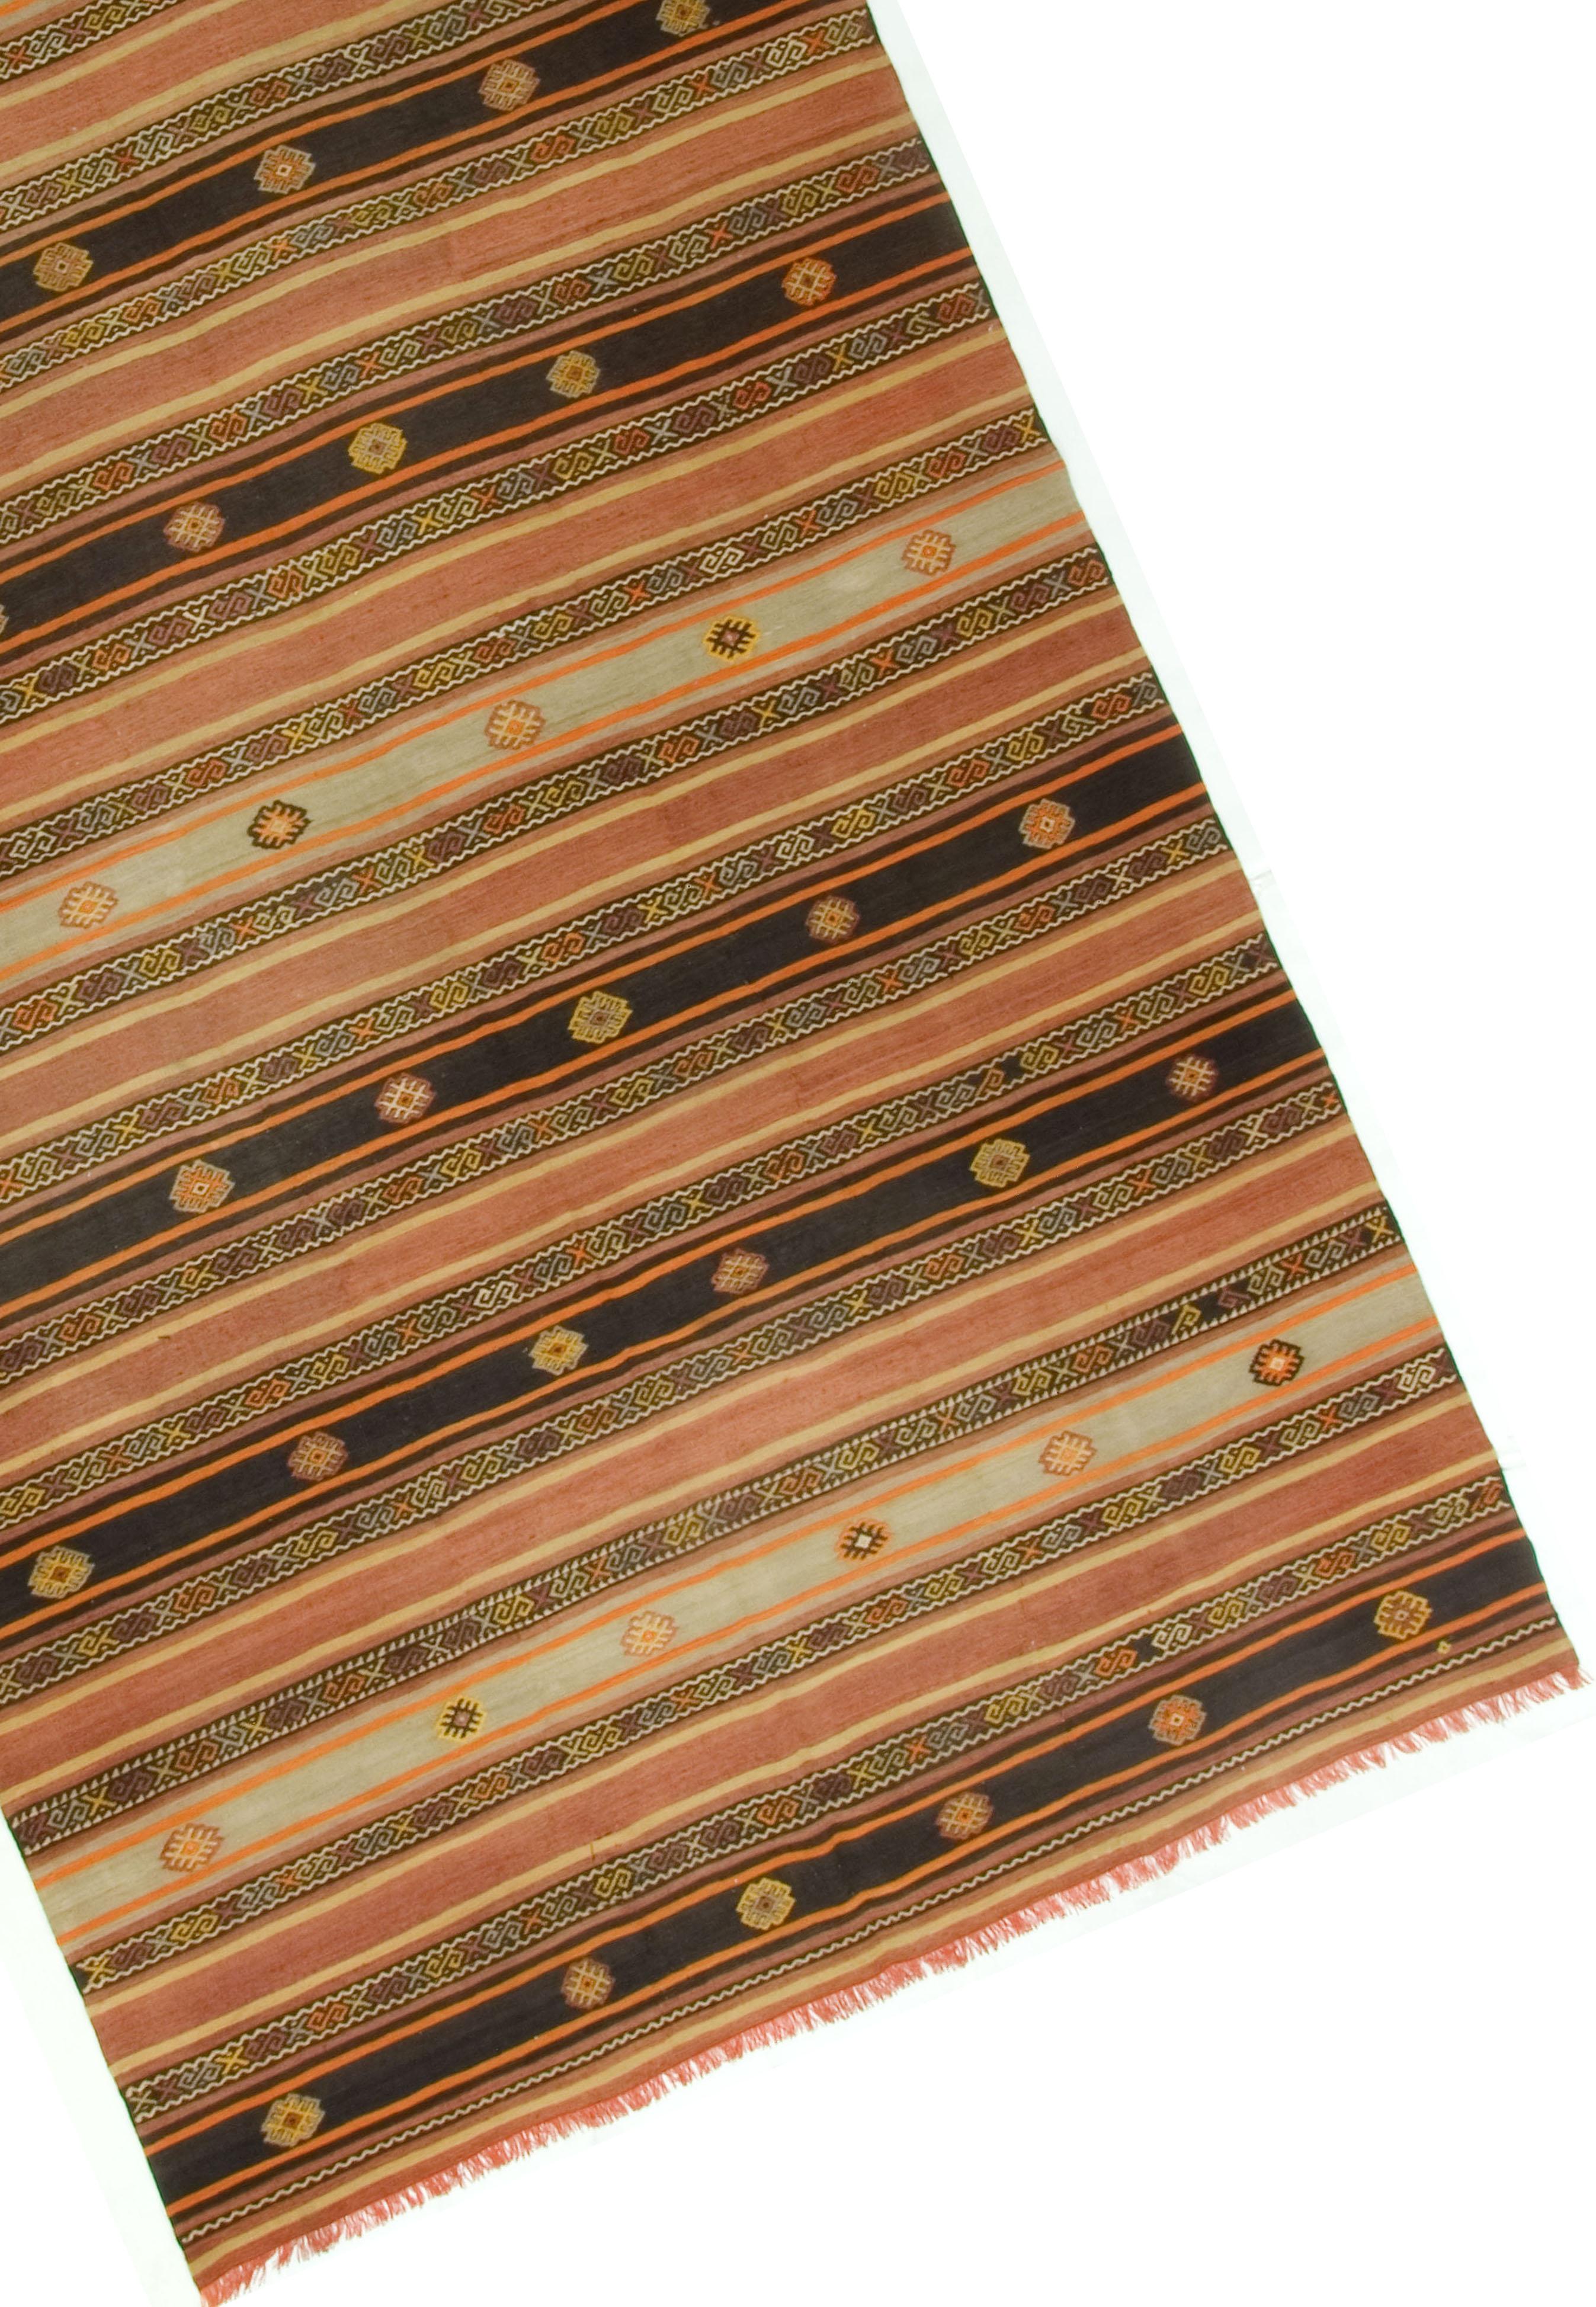 Vintage Turkish Handwoven Kilim, 6'3 x 11'7 In Good Condition For Sale In New York, NY